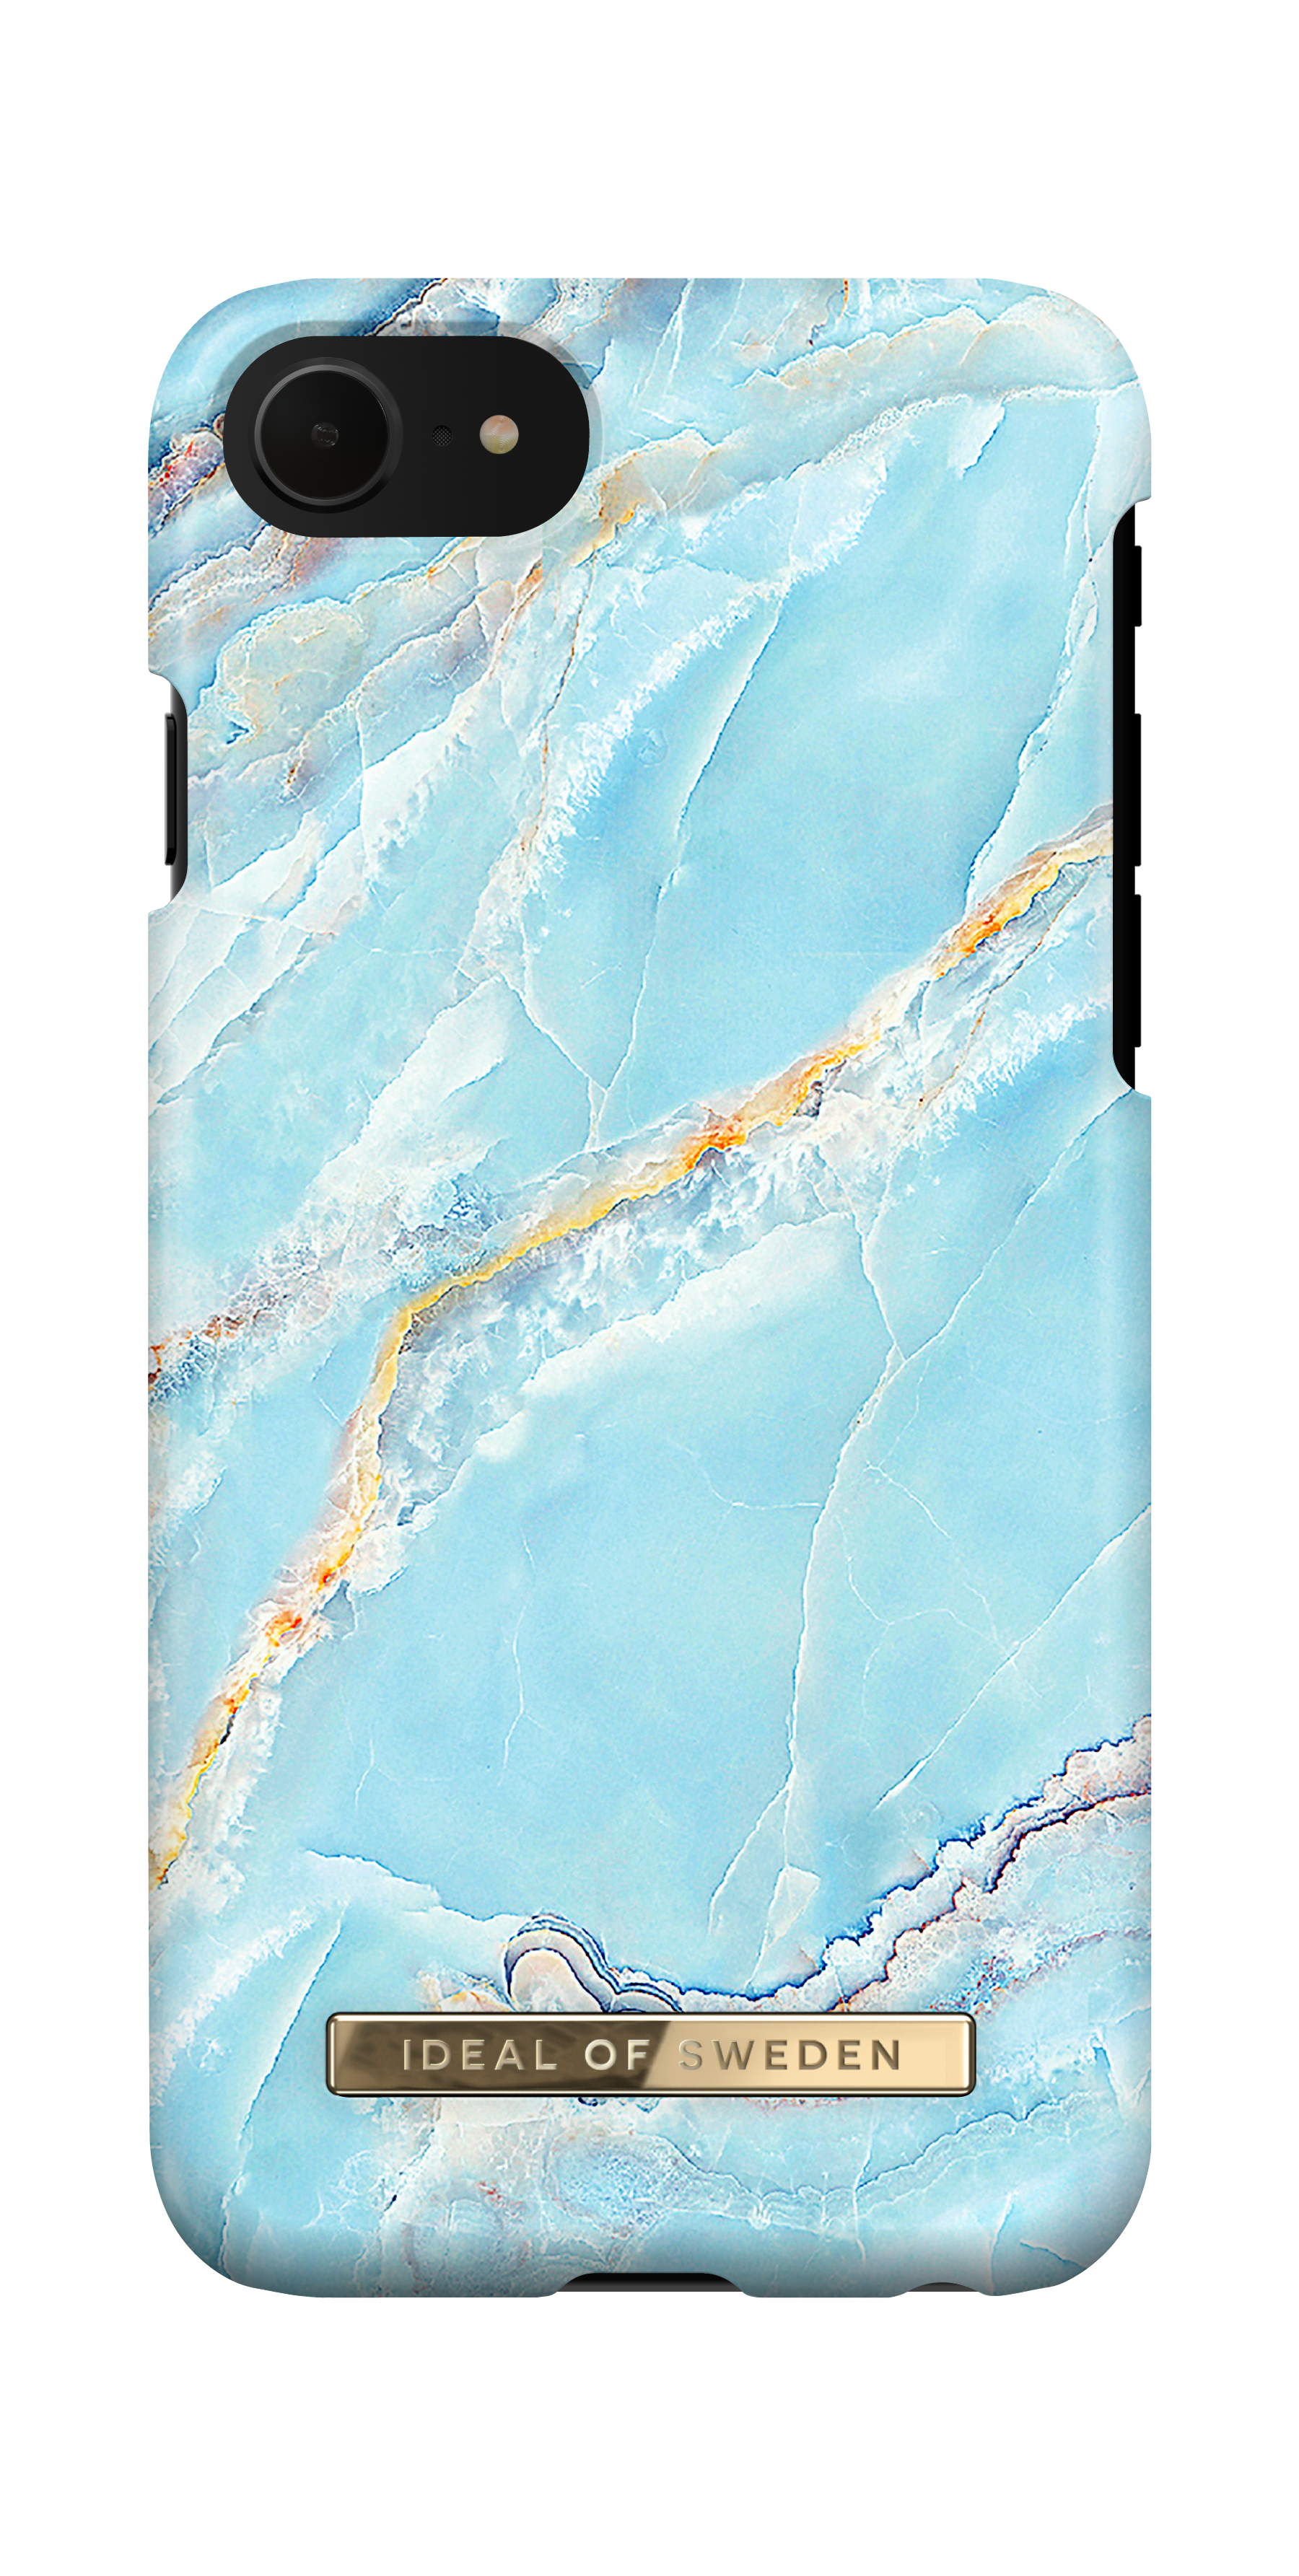 Backcover, IDFCS17-I7-57, IDEAL IPhone Apple, OF 8/7/6/6s/SE, Island Paradise Marble SWEDEN